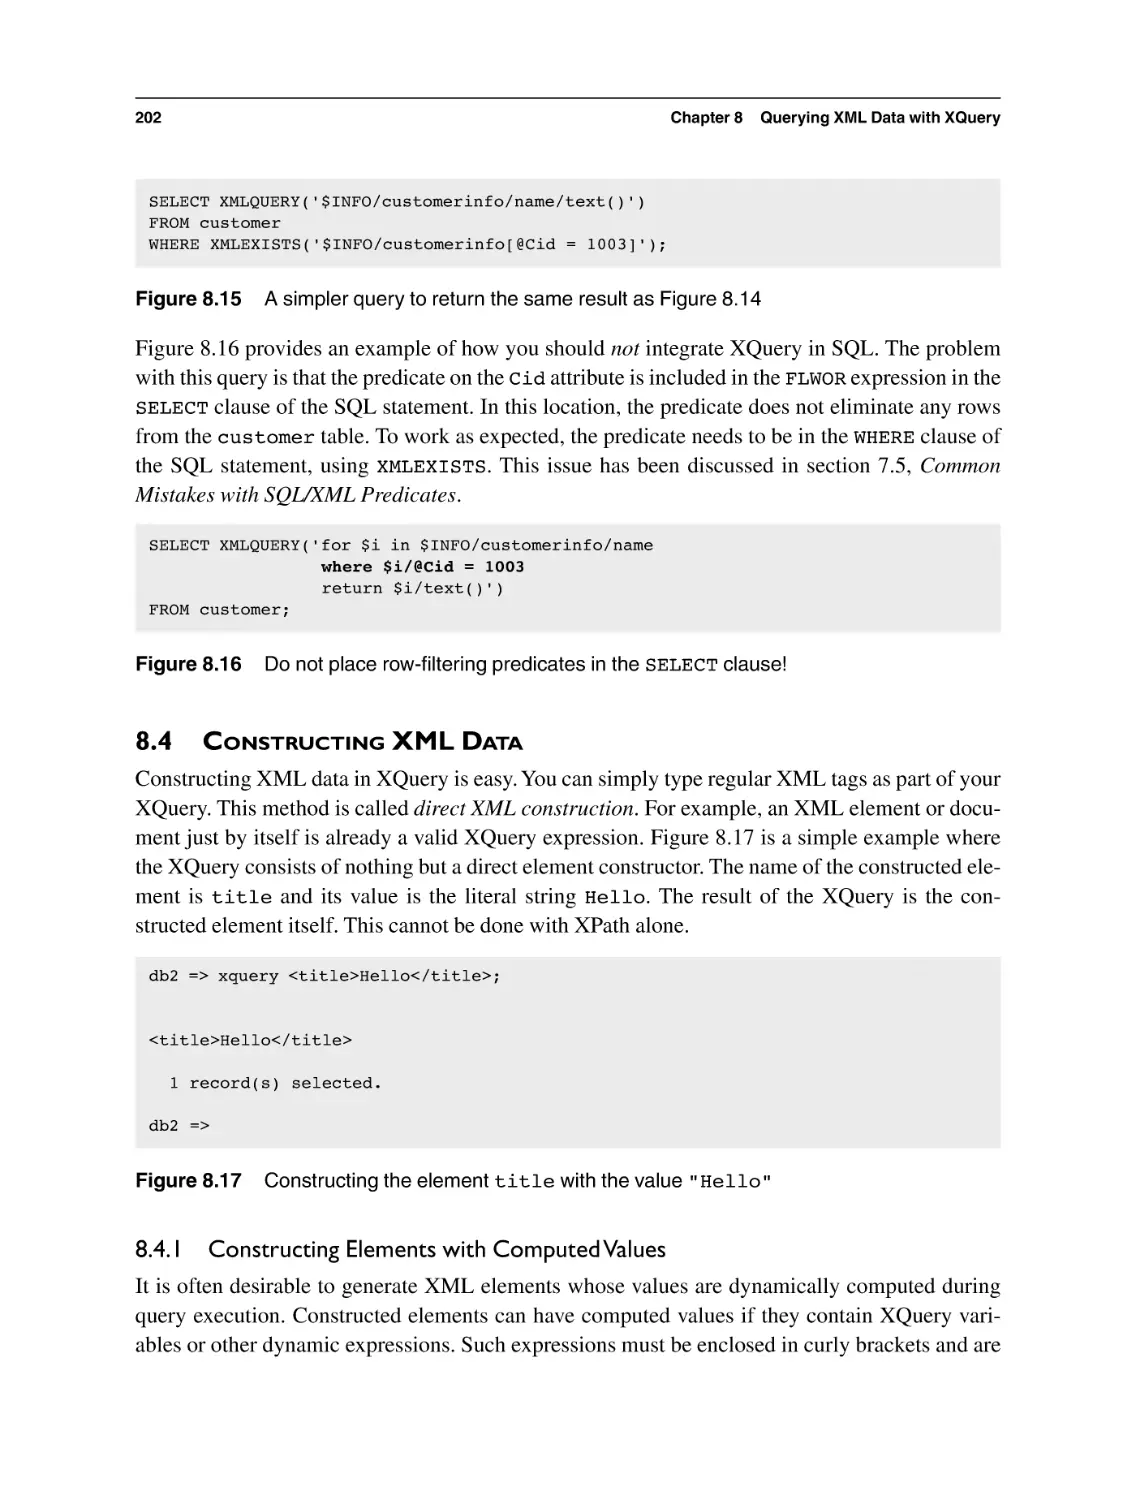 8.4 Constructing XML Data
8.4.1 Constructing Elements with Computed Values